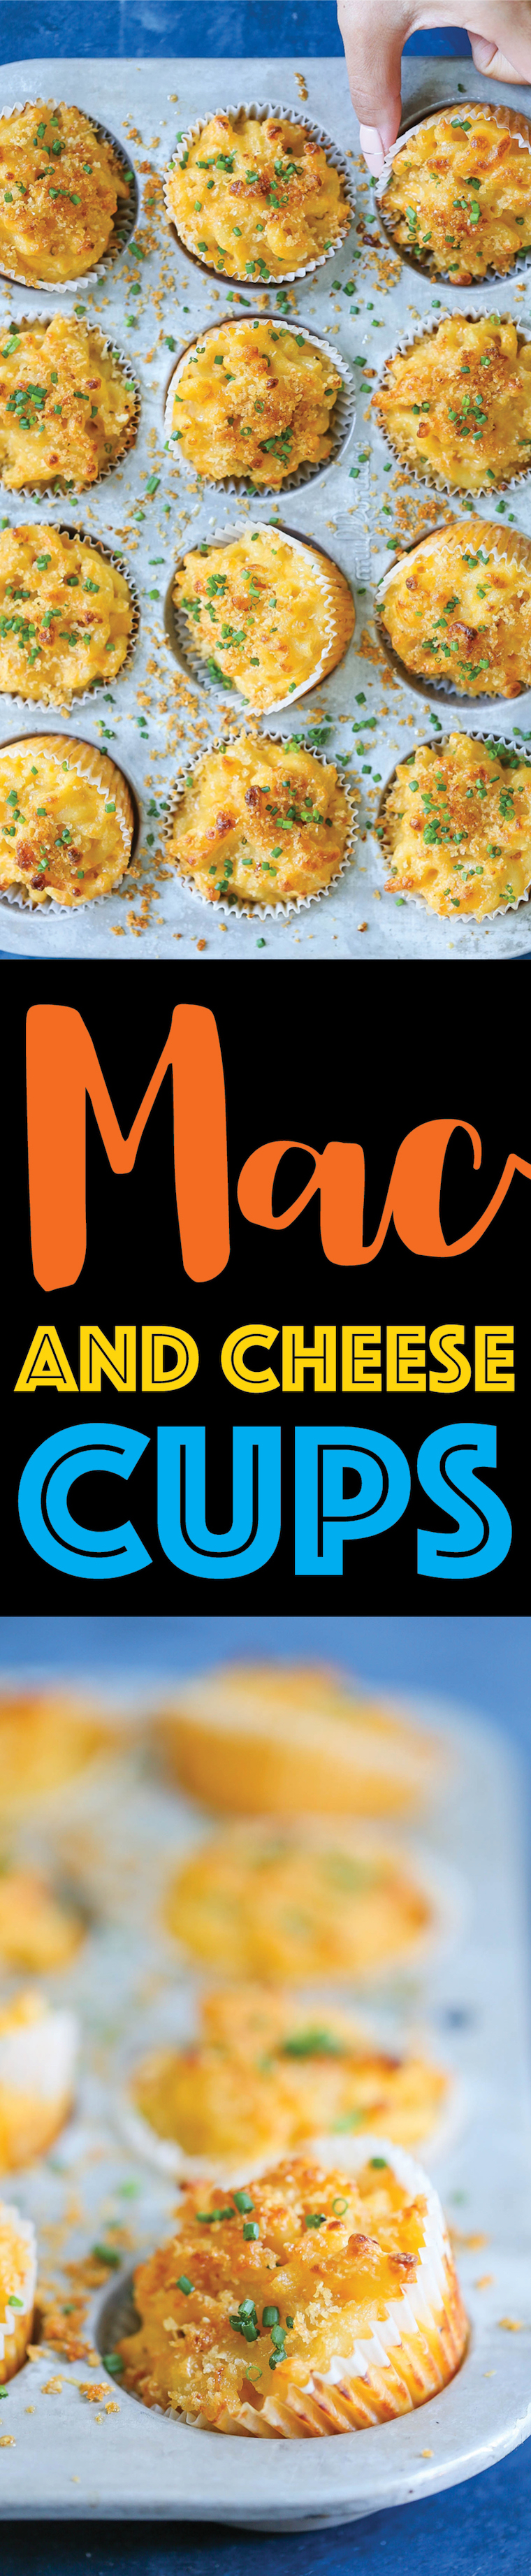 Mac and Cheese Cups - Macaroni and cheese baked to perfection in muffin tins! Great for holidays and lunch boxes – it’s portable and makes for easy serving!